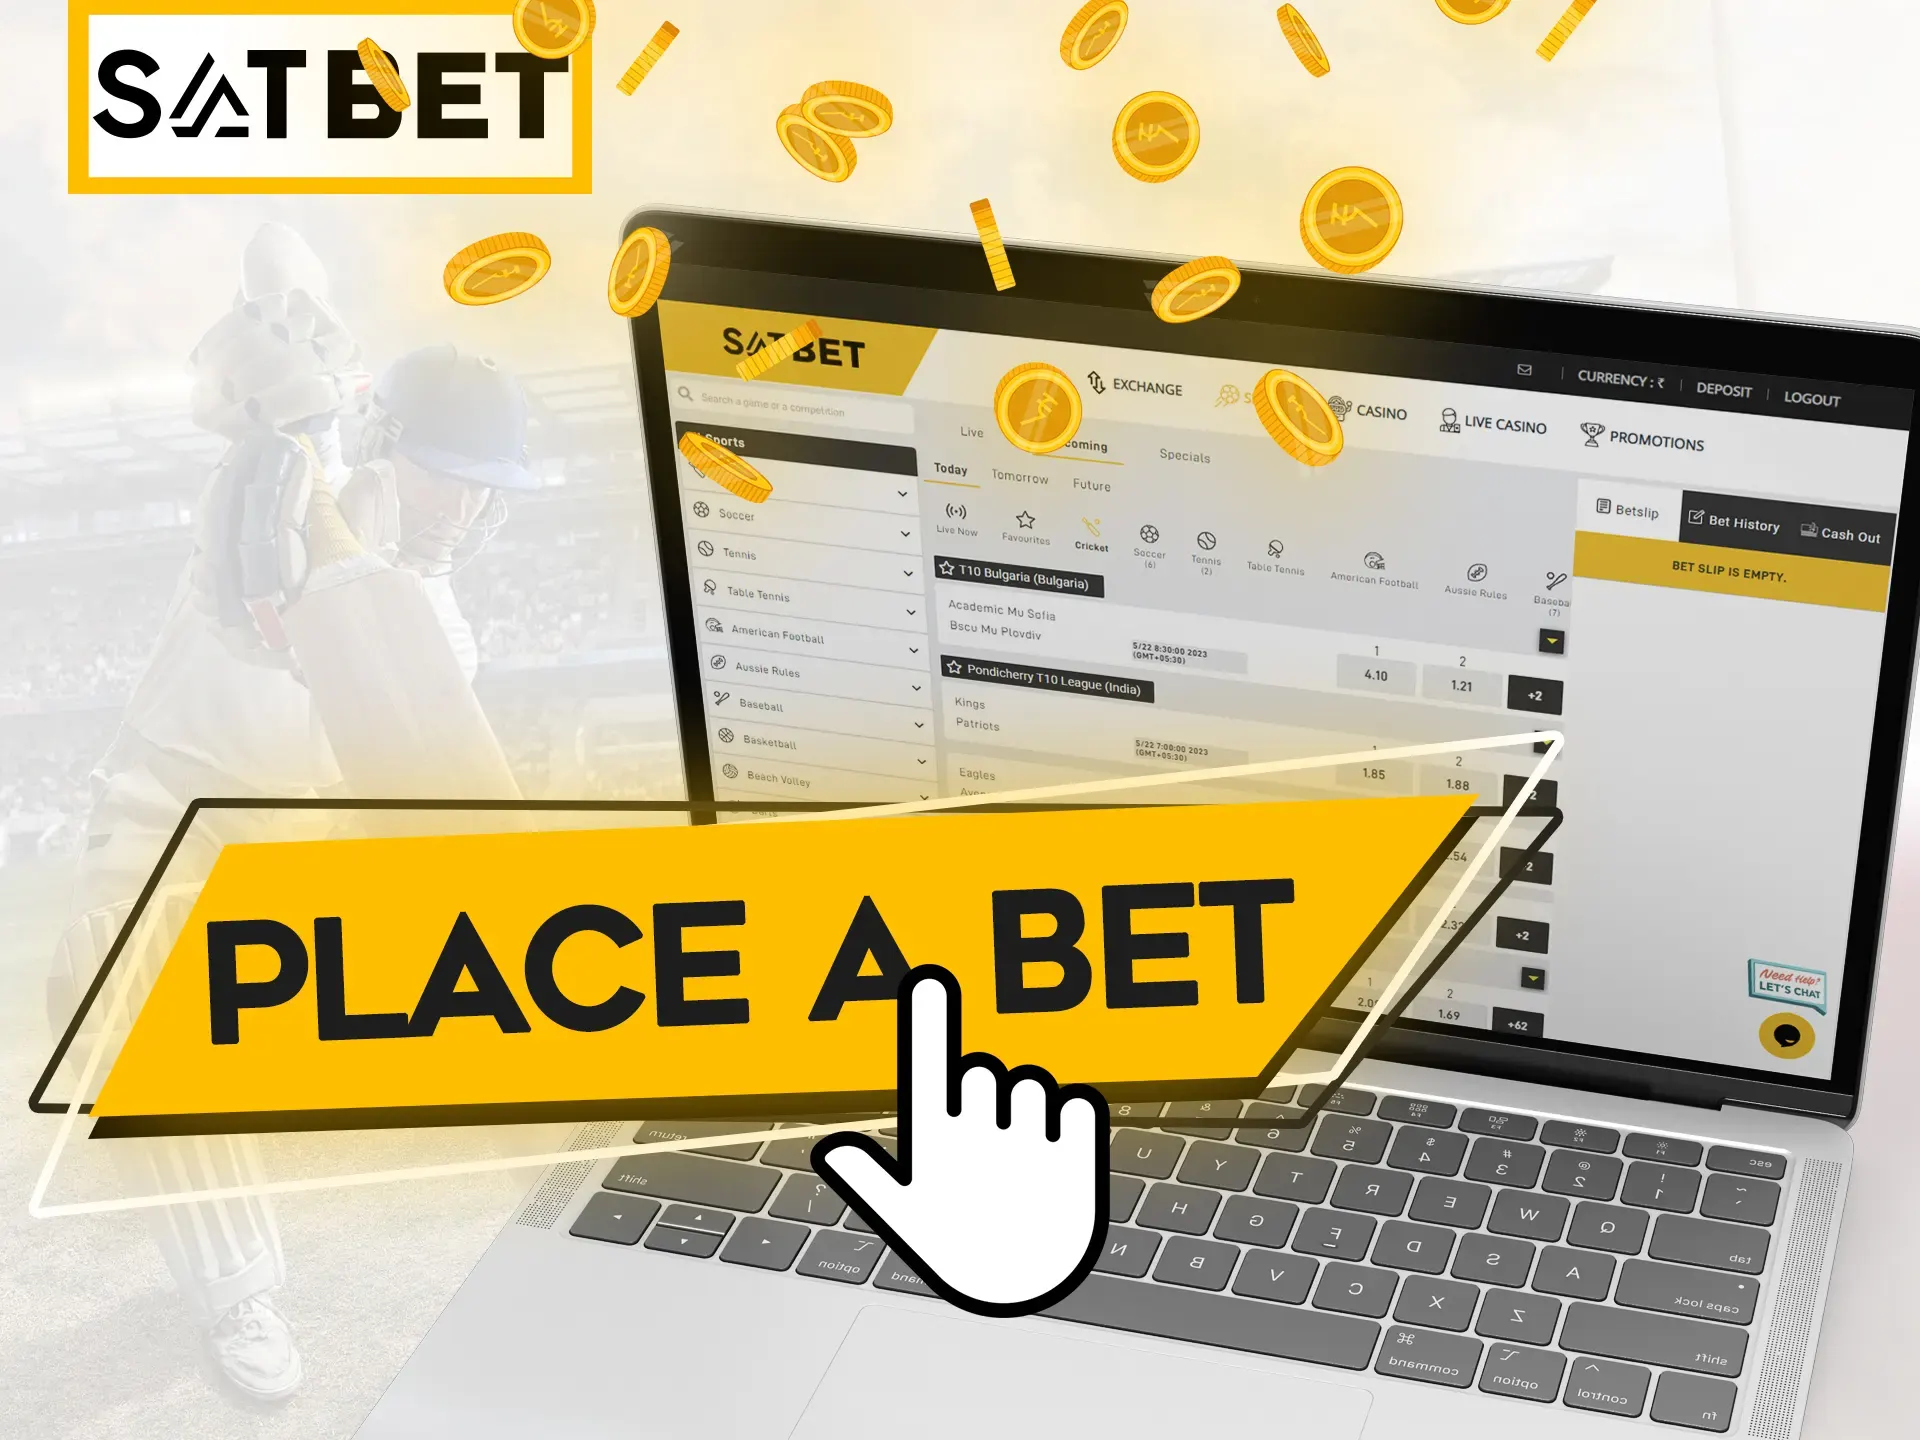 Make bets at Satbet with simple steps.